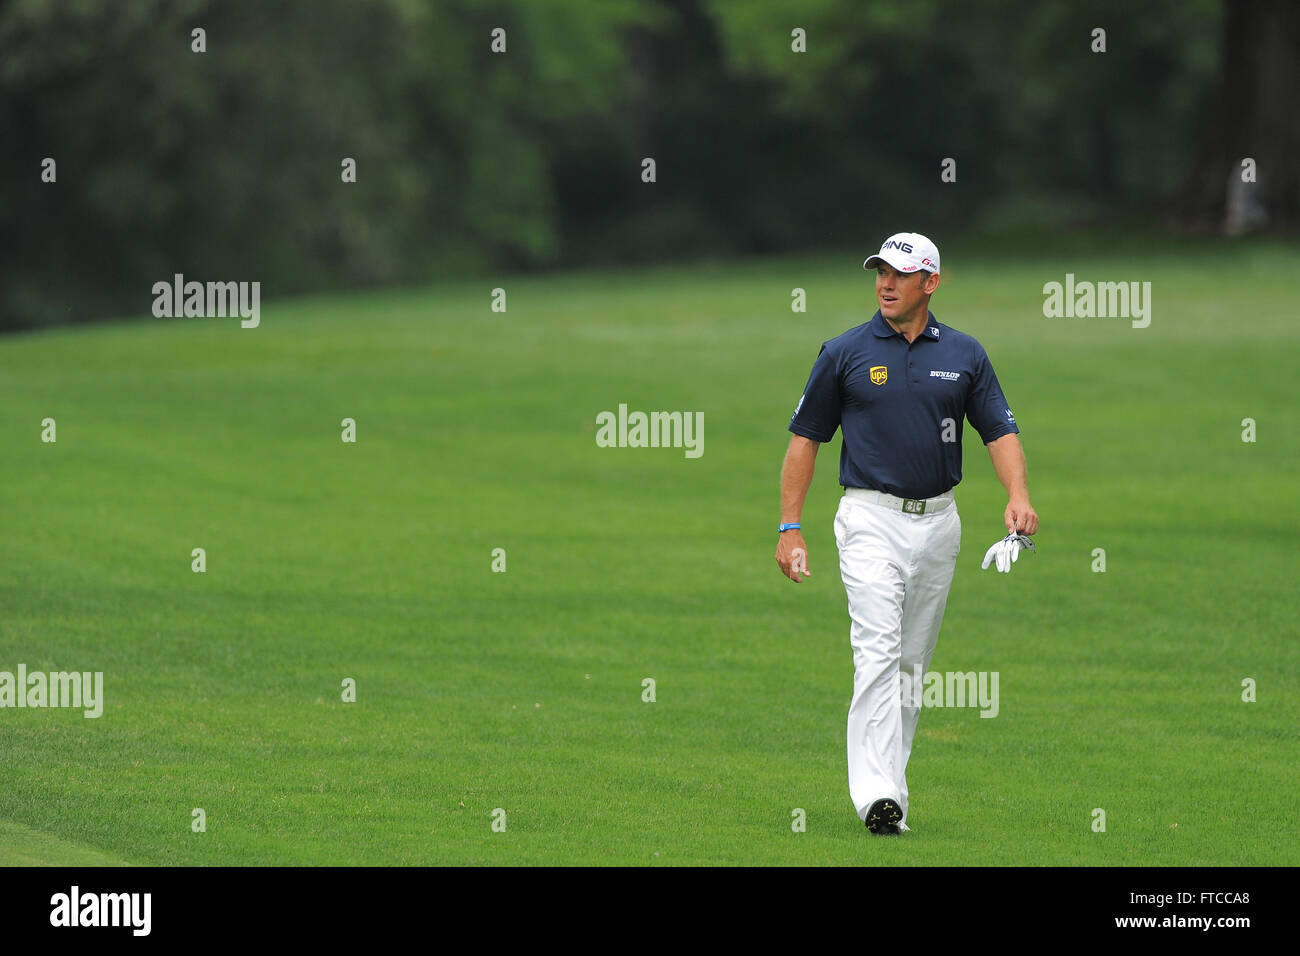 Charlotte, North Carolina, USA. 6th May, 2012. Lee Westwood during the final round of the Wells Fargo Championship at the Quail Hollow Club on May 6, 2012 in Charlotte, N.C. ZUMA PRESS/ Scott A. Miller. © Scott A. Miller/ZUMA Wire/Alamy Live News Stock Photo